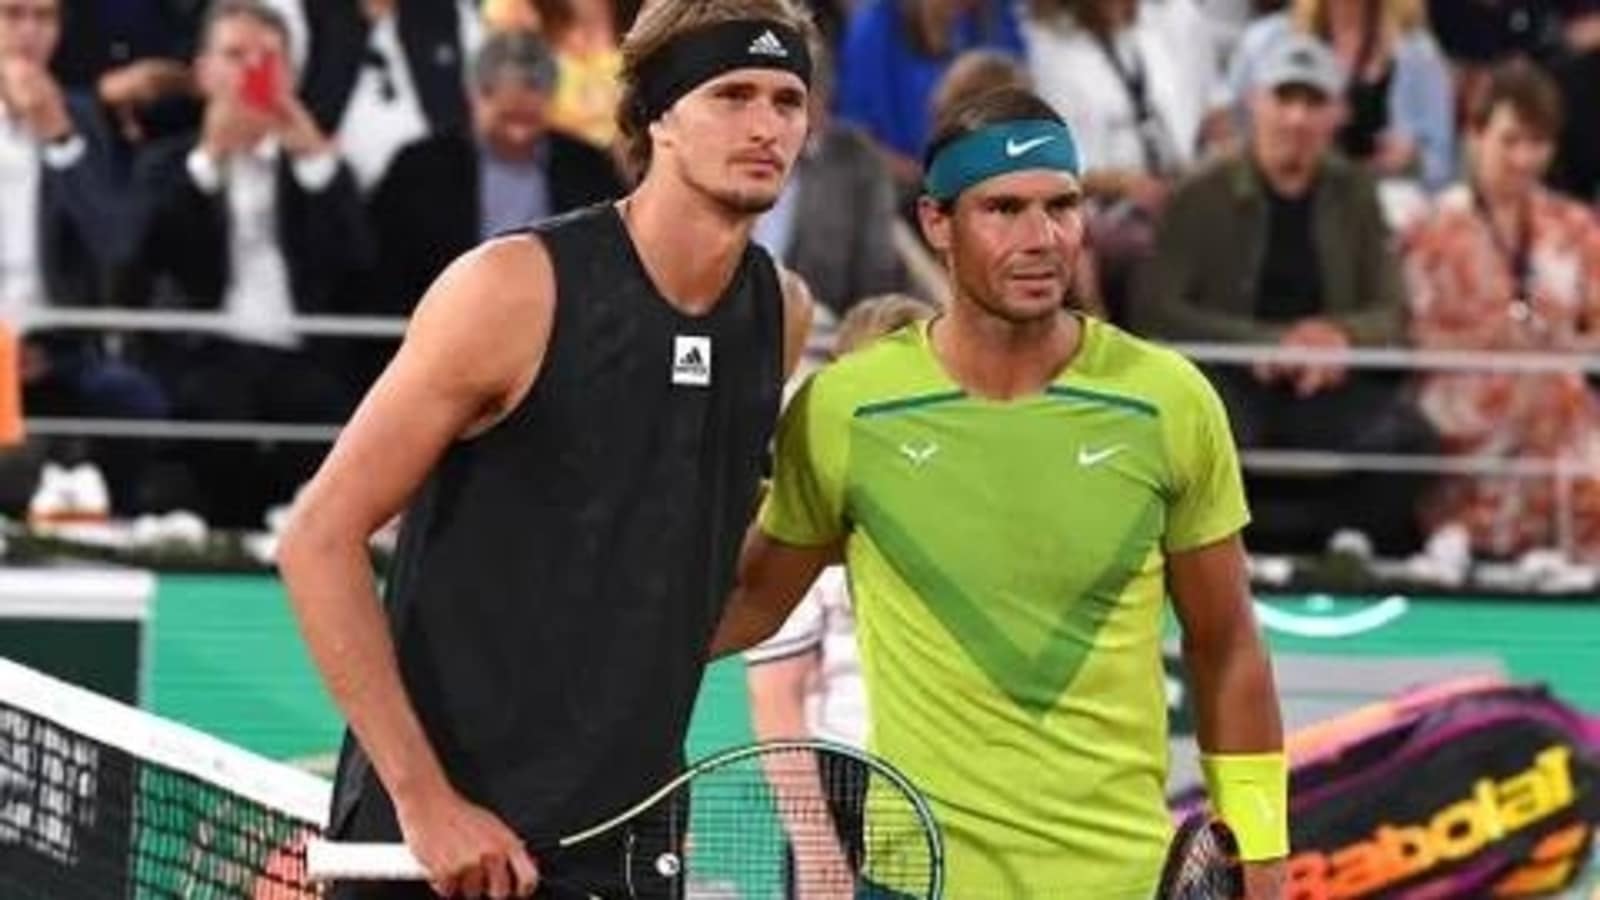 Zverev makes bold Nadal retirement prediction after Spaniard bans questions: ‘He’ll win it there and then say goodbye’